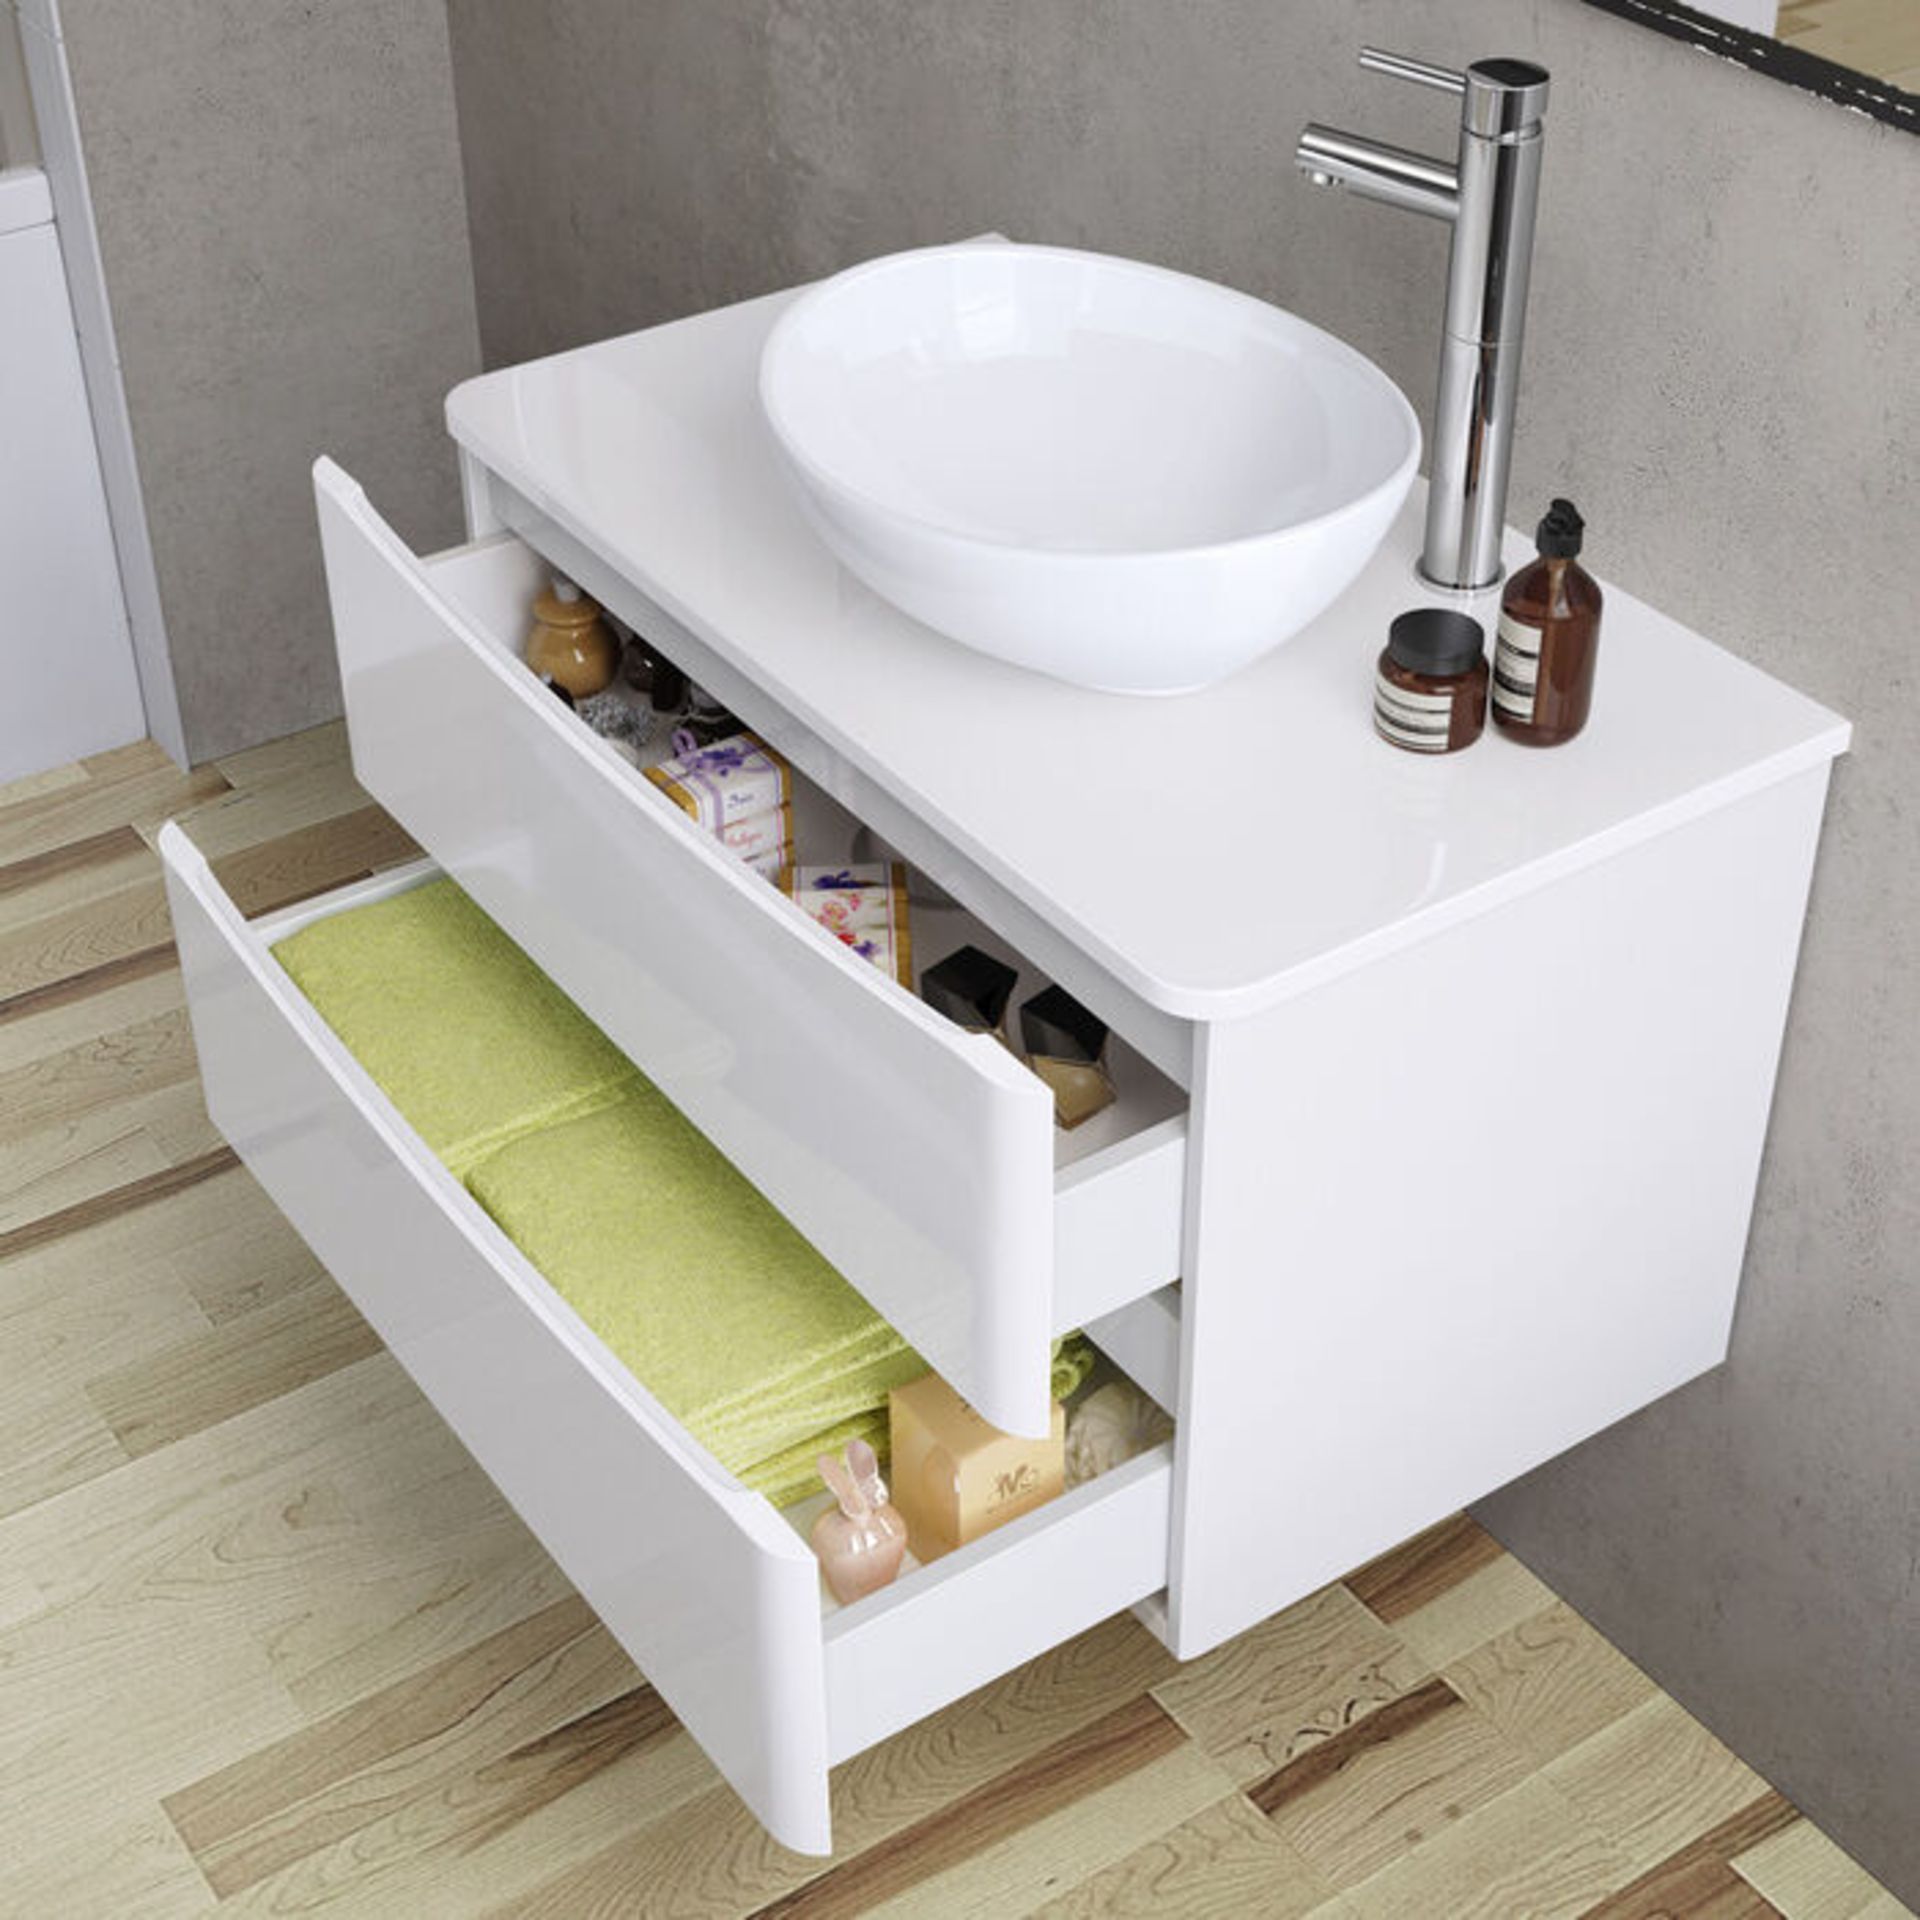 NEW & BOXED 1000mm Austin II Gloss White Countertop Unit and Camila Basin - Wall Hung. RRP £99... - Image 3 of 3